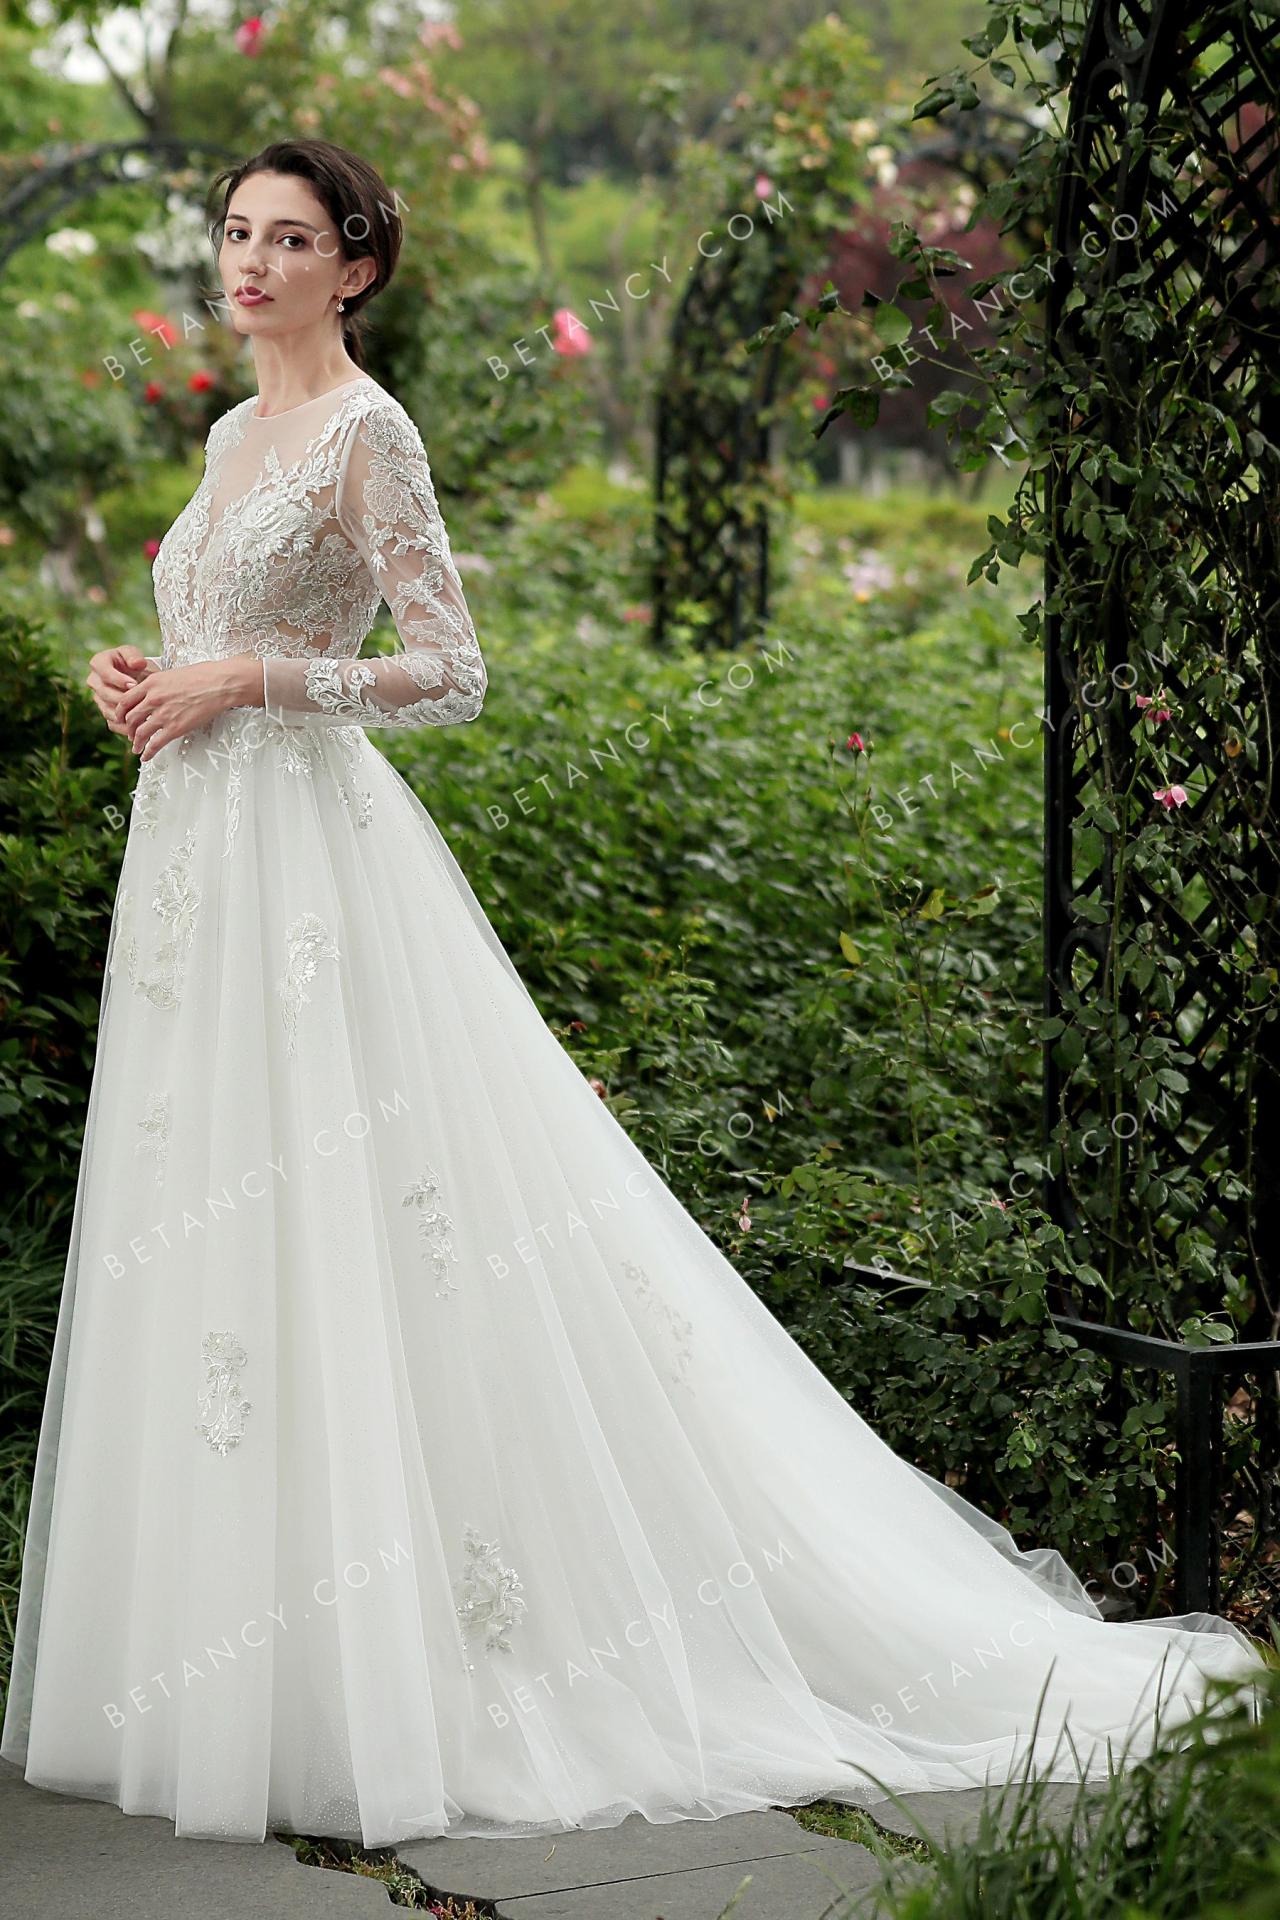 Sequinned lace illusion wedding dress 2